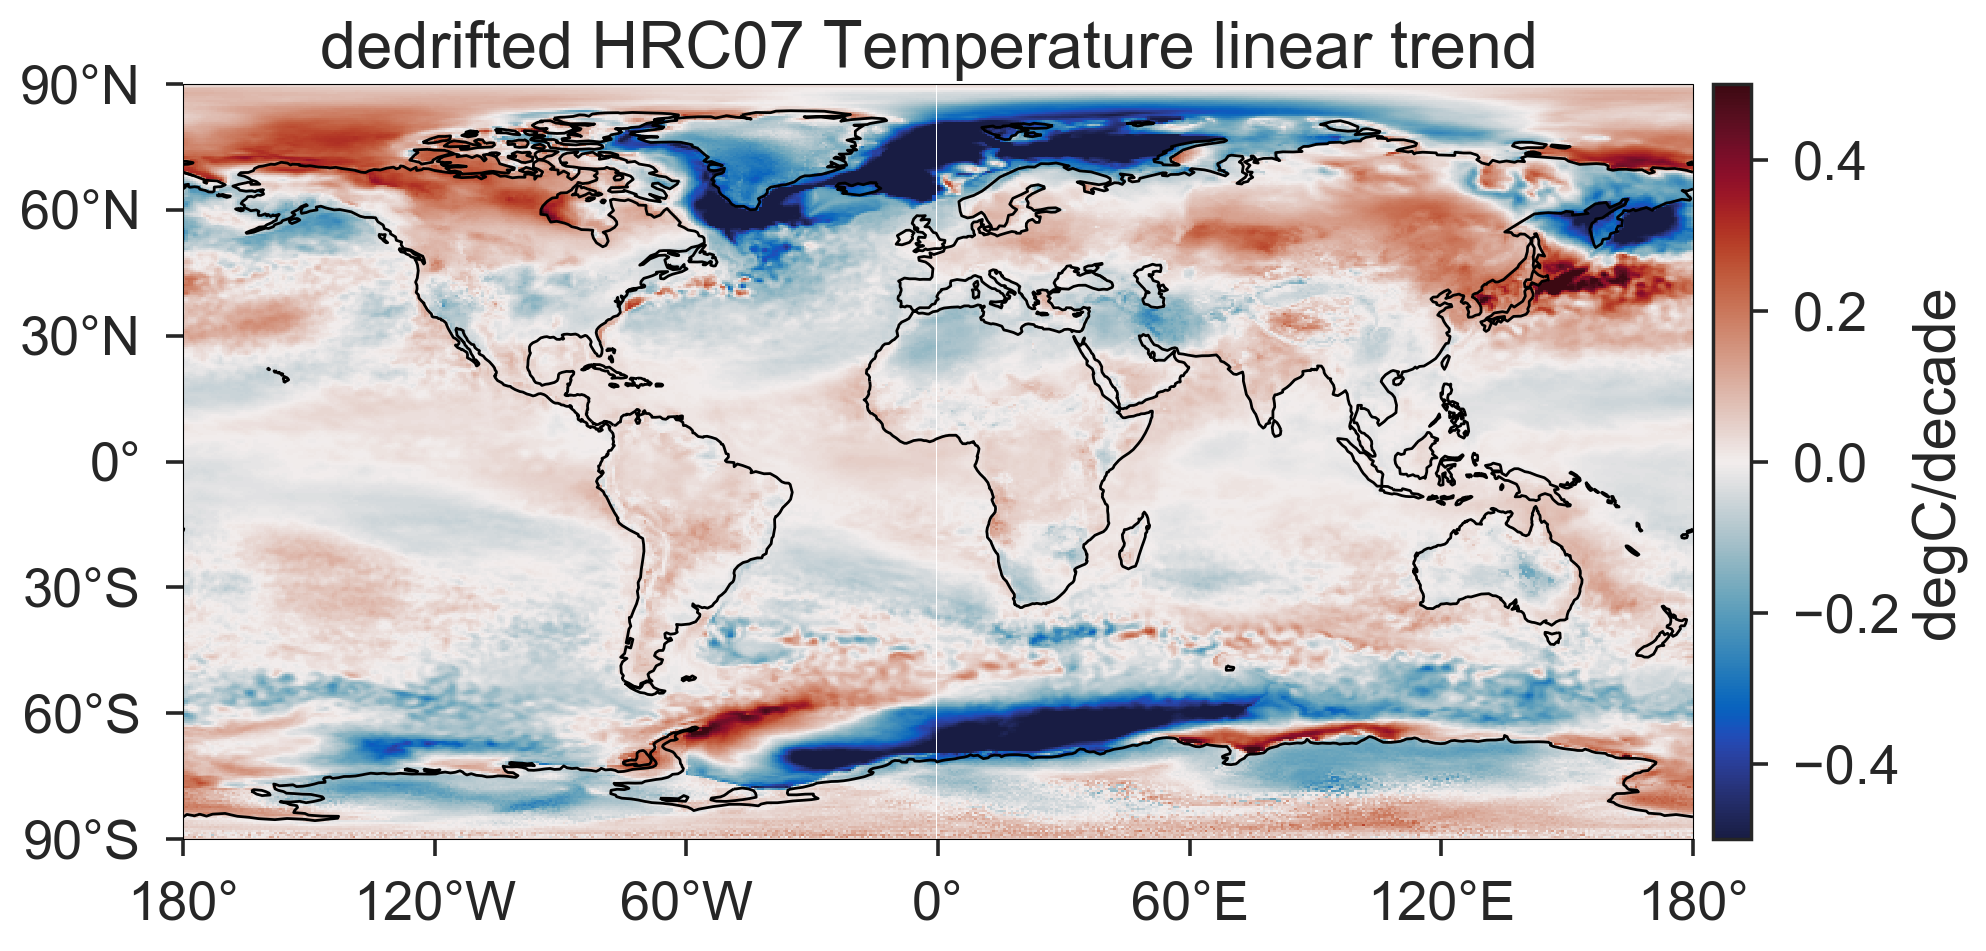 HRC07 TS linear trends from 1953 to 2008 with model drift removed